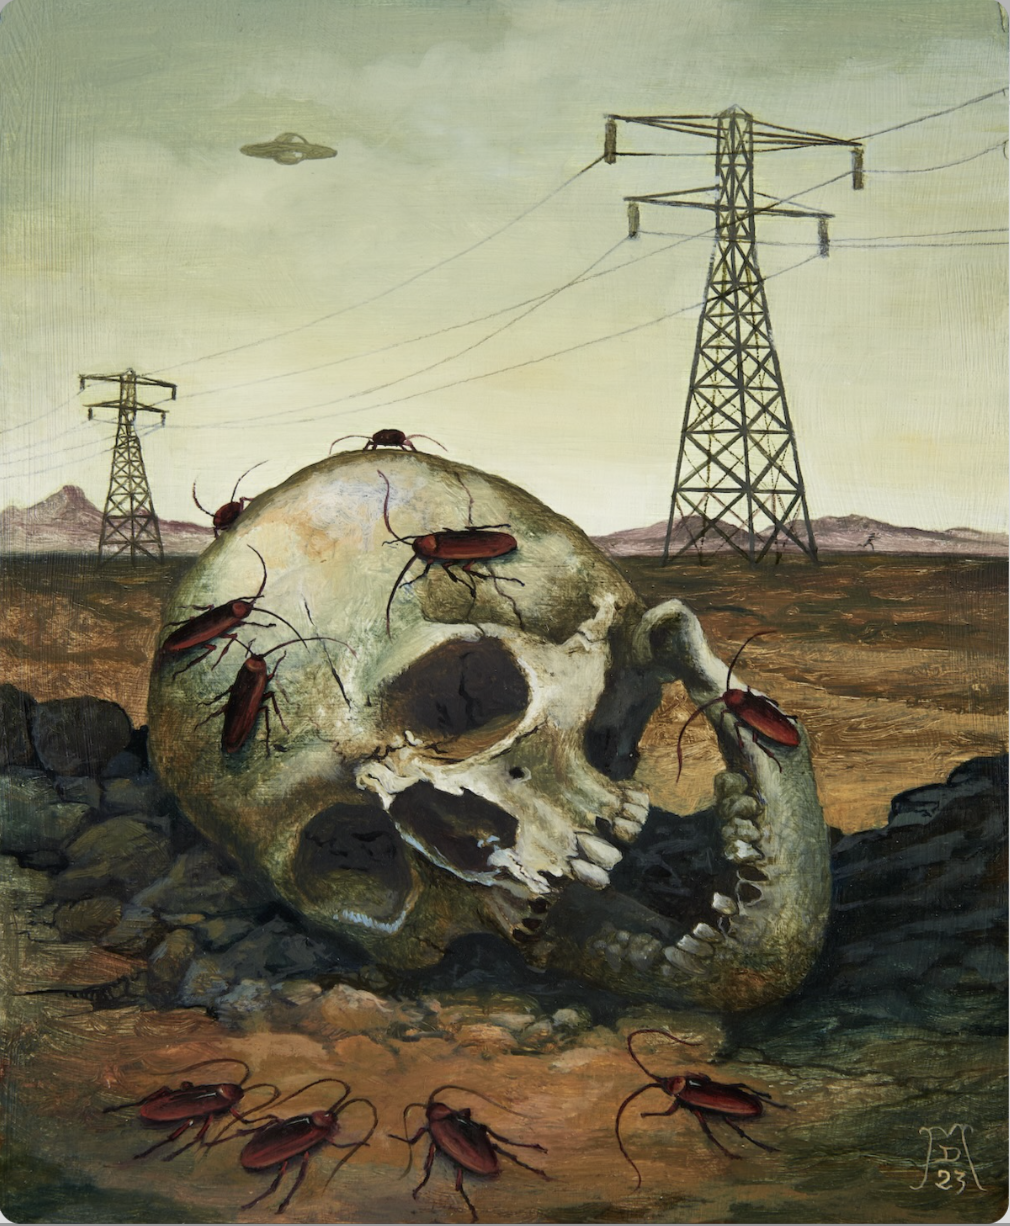 A human skull lies on its side in the dirt, covered in cockroaches. Behind stand two electrical pylons and wires while a flying saucer hovers in the sky.